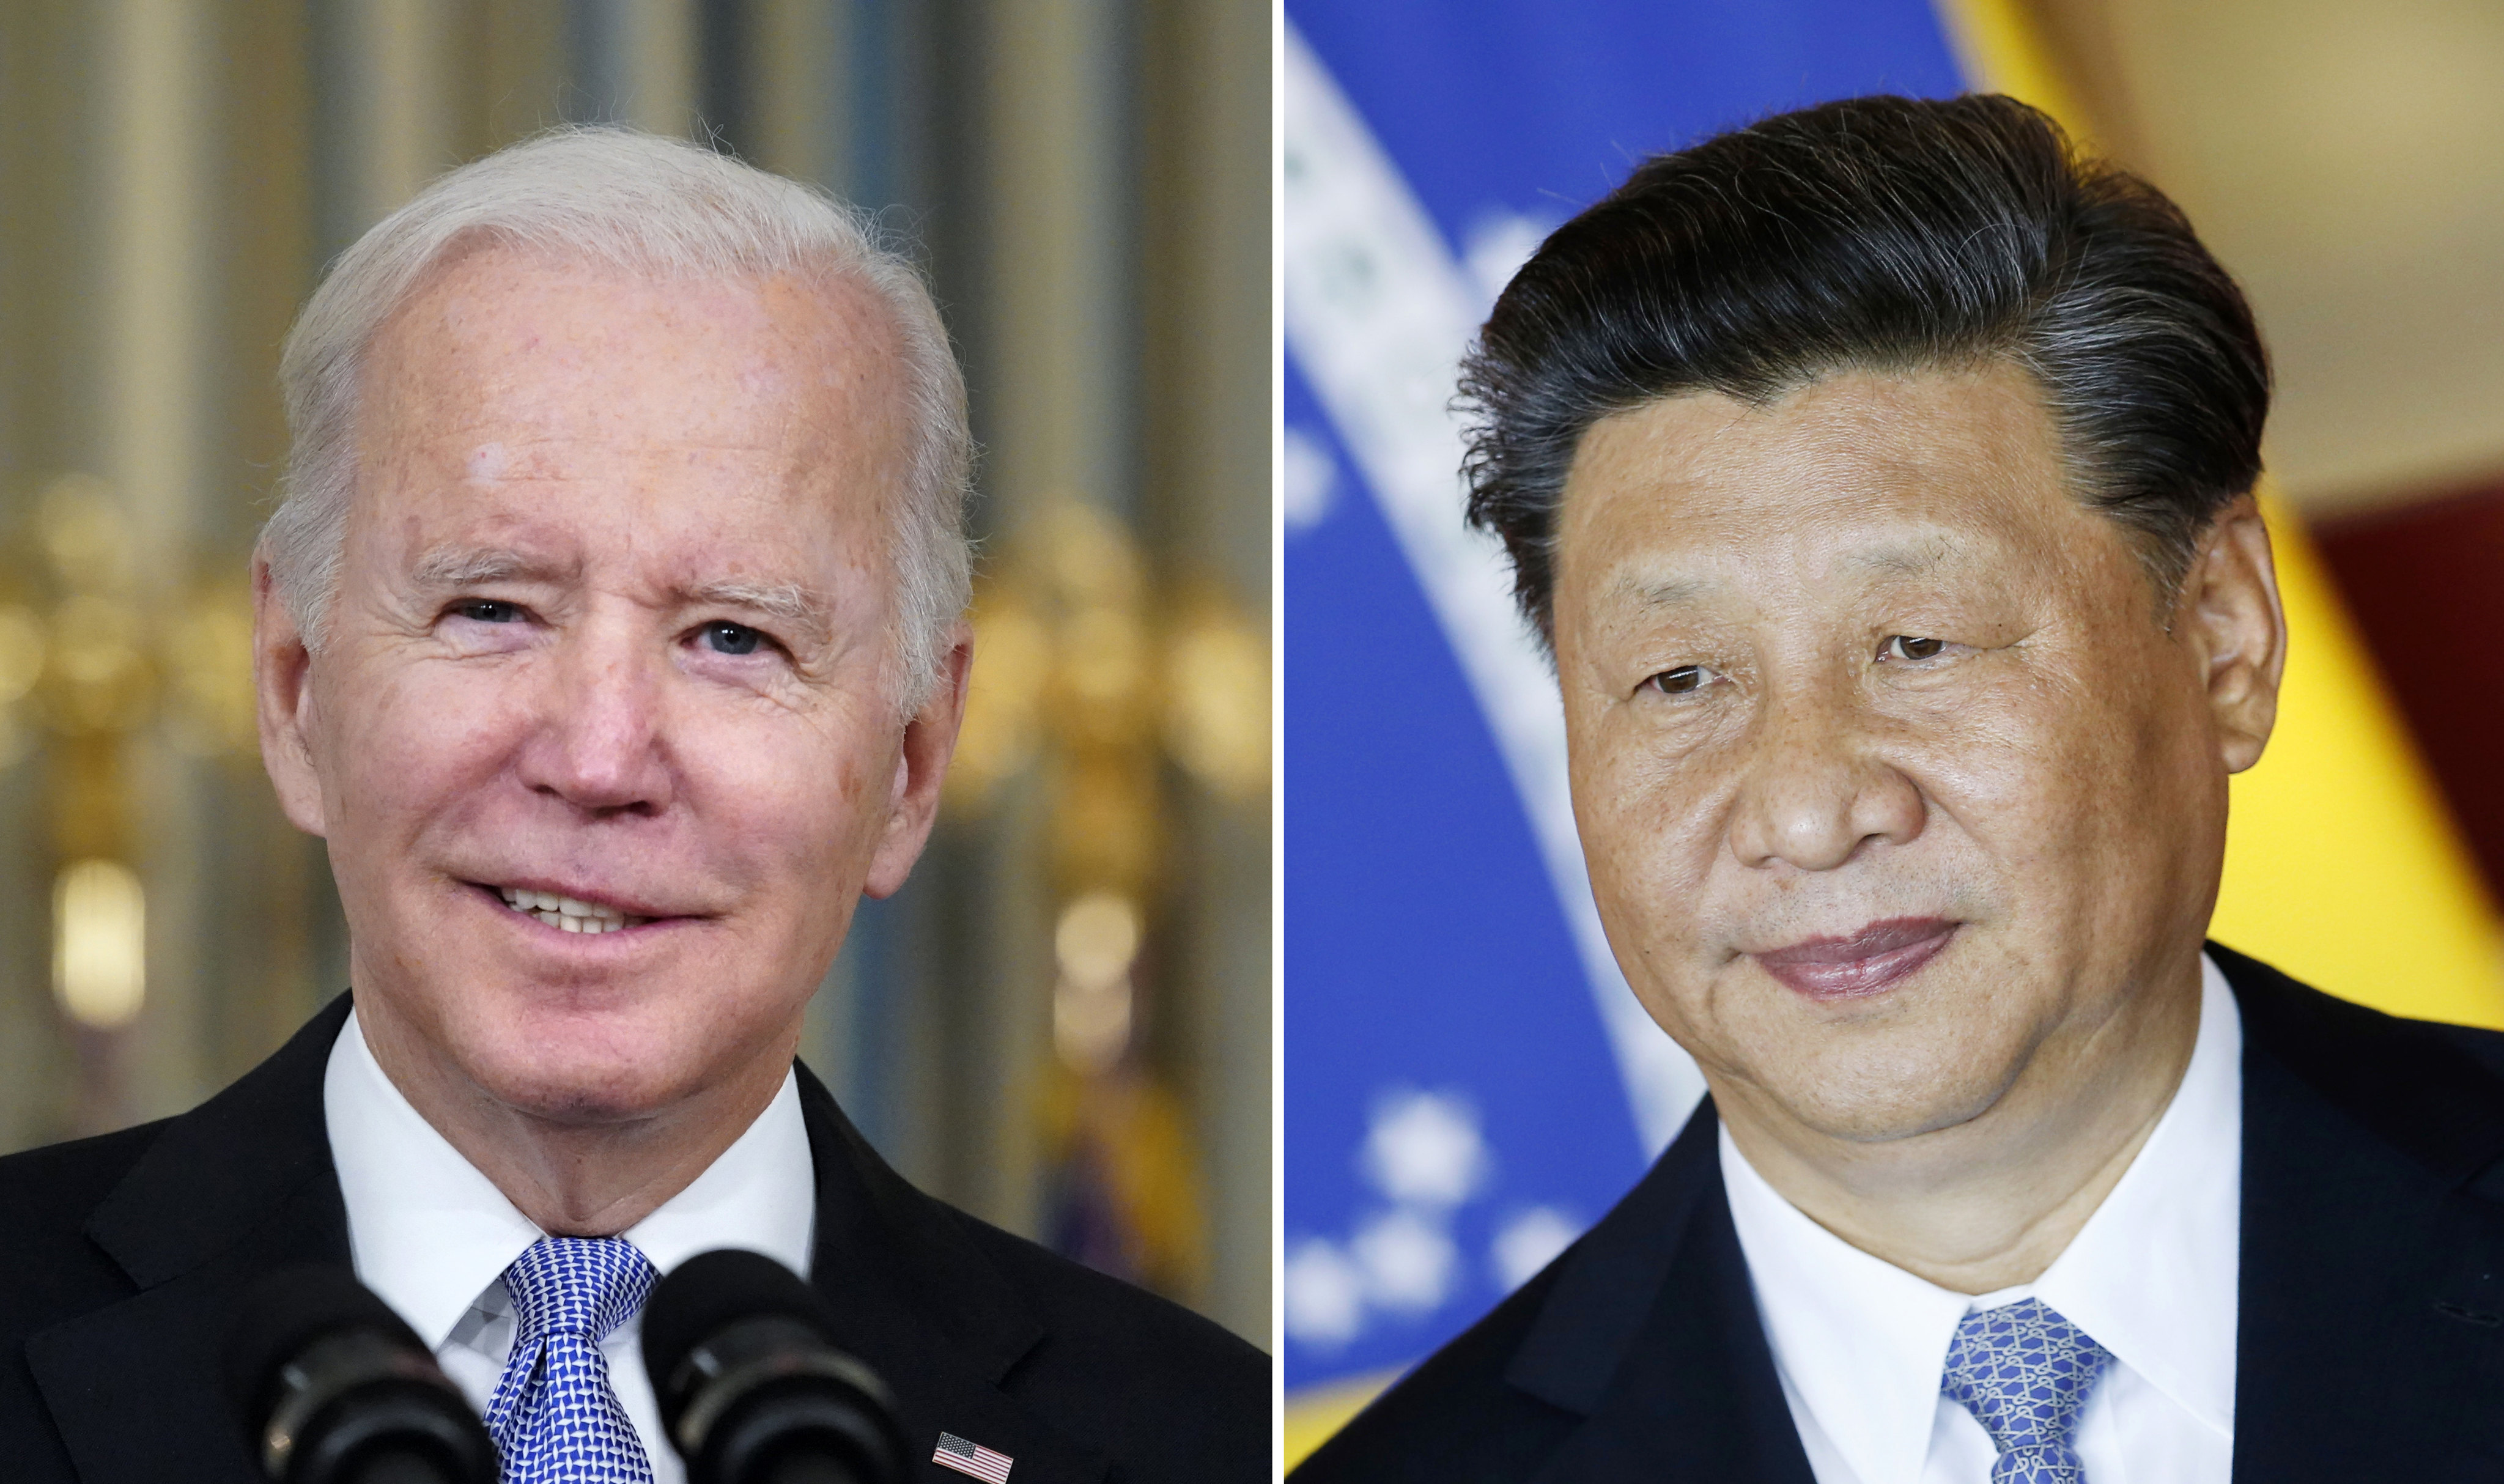 US President Joe Biden and Chinese President Xi Jinping held a long-awaited call. Tension between their two nations has been exacerbated by reports of US House Speaker Nancy Pelosi planning a trip to Taiwan. Photo: AP Photo